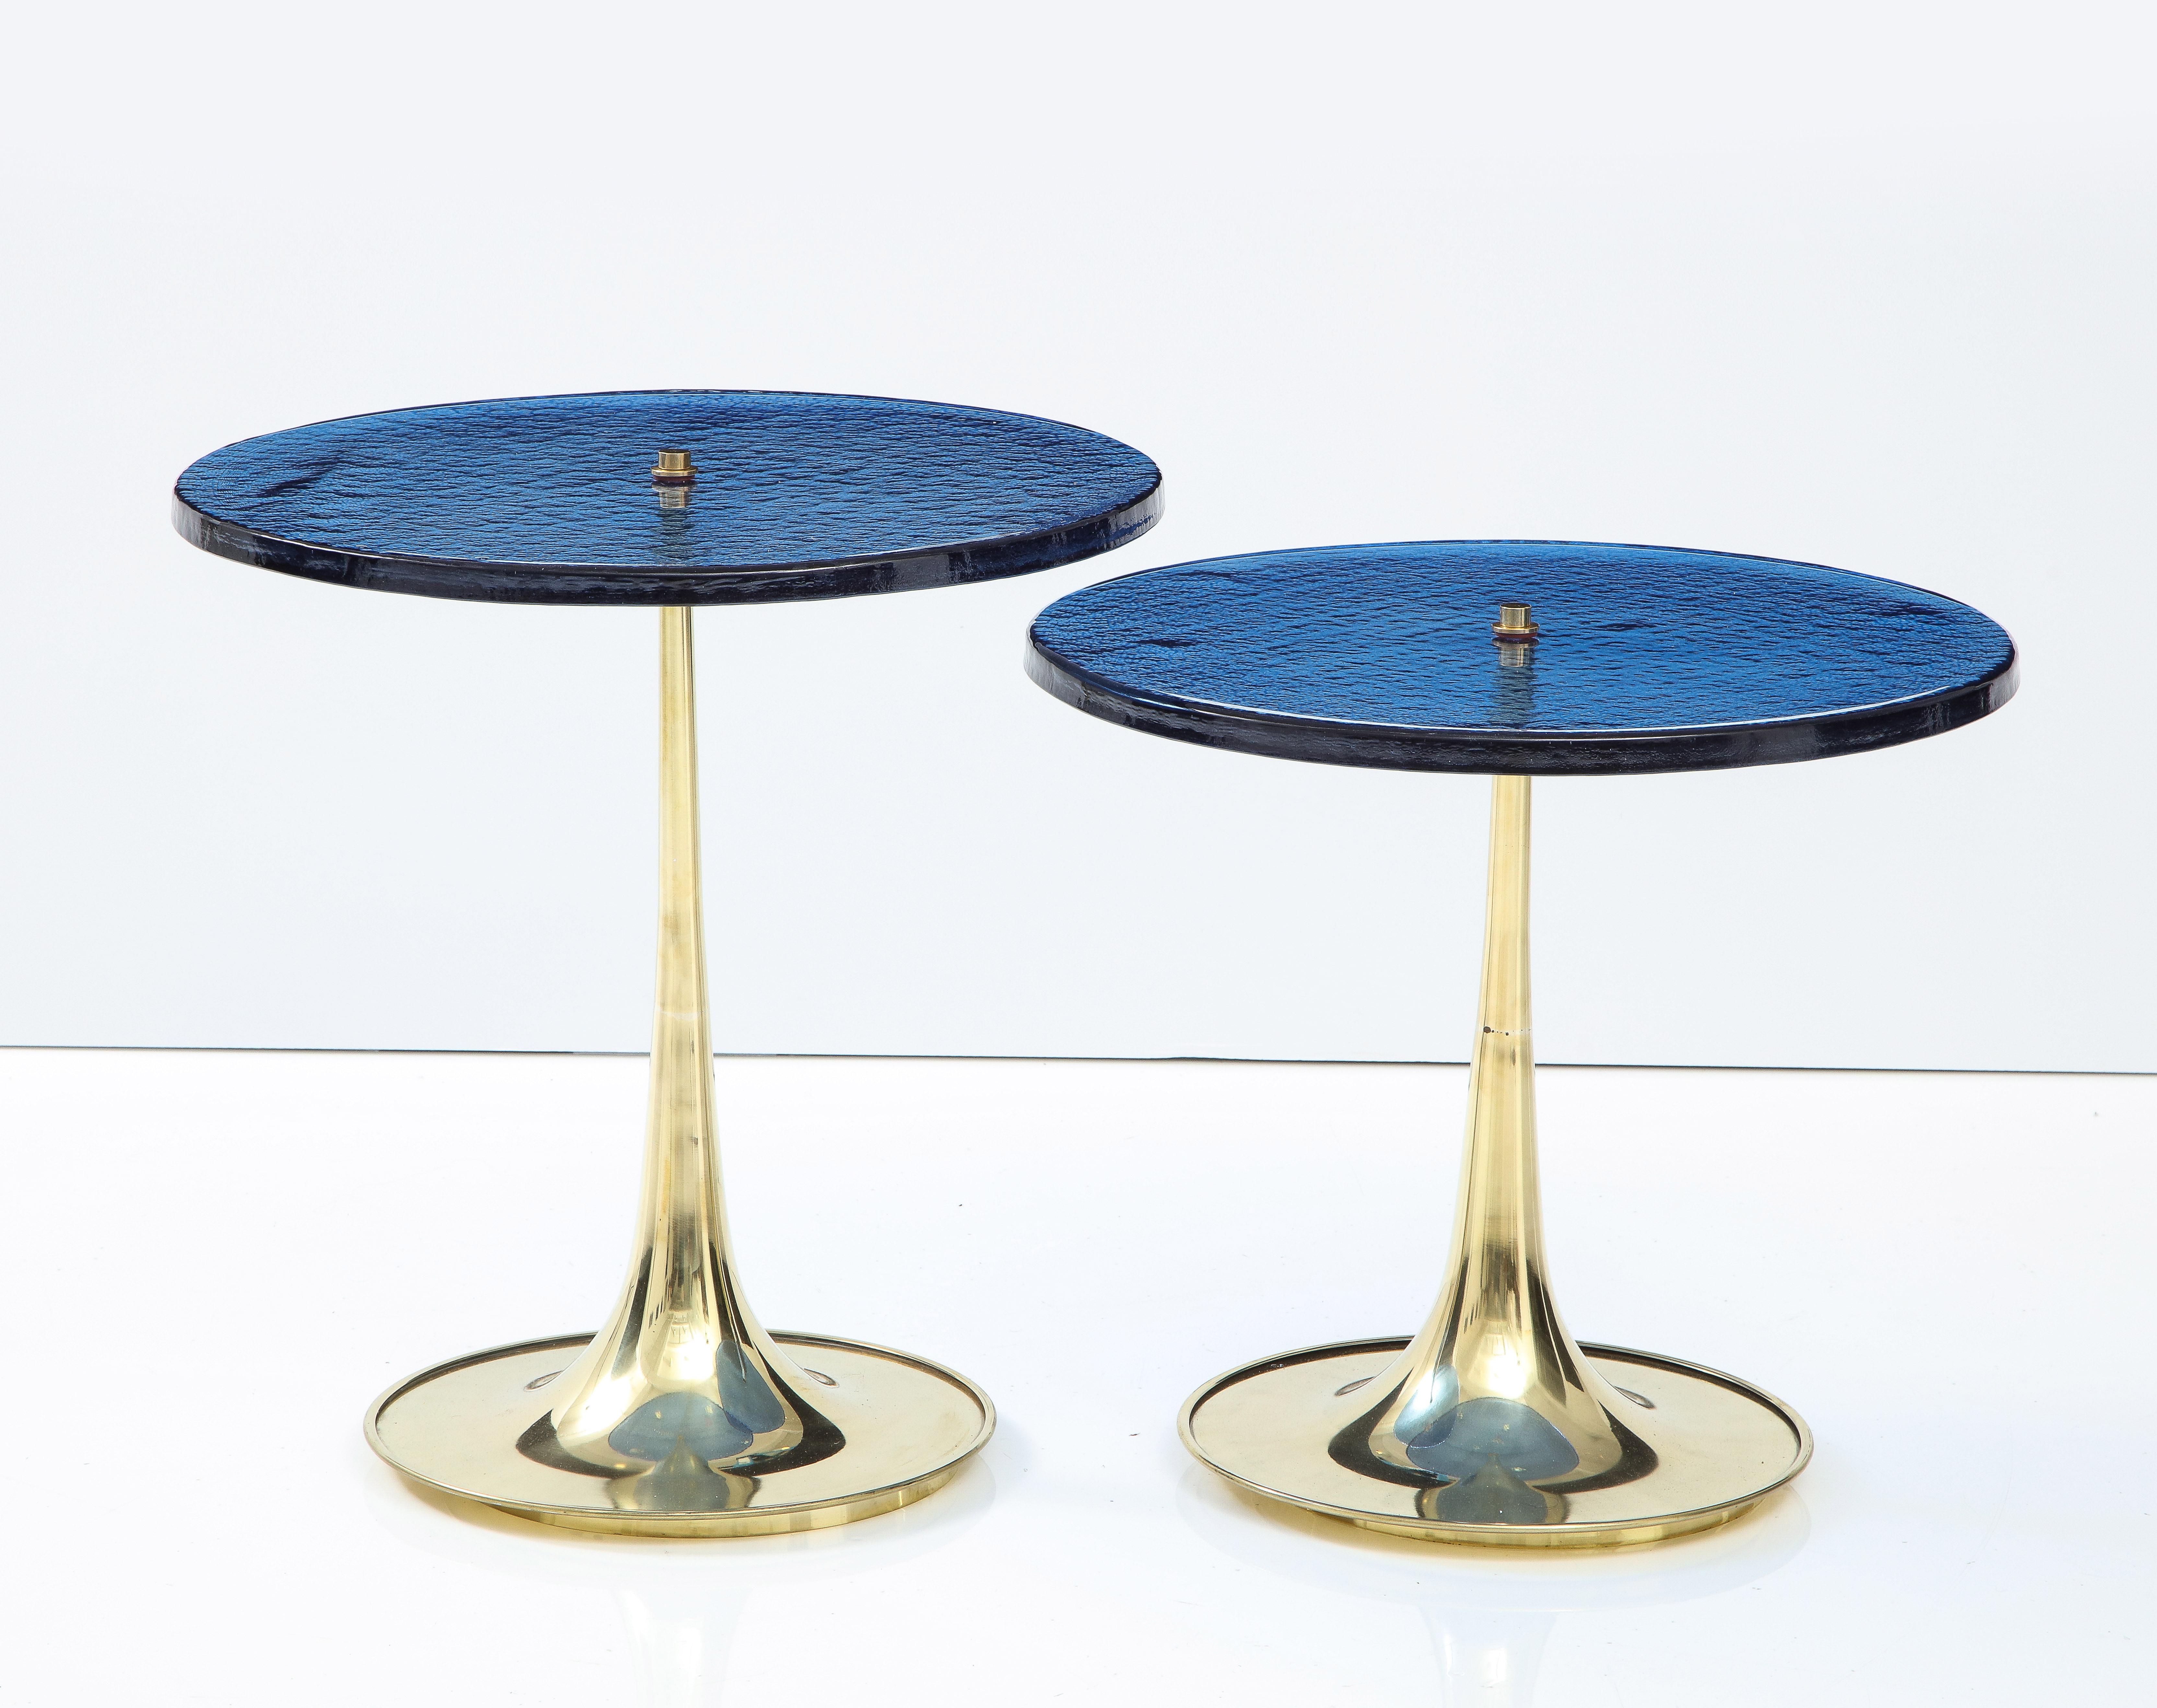 Pair of round deep blue murano glass and brass martini or side tables, Italy, 2022. Hand-casted 1 inch thick, solid deep blue colored Murano round glass sits atop a hand -turned trumpet-shaped brass base. Modern flat top brass finial screws the